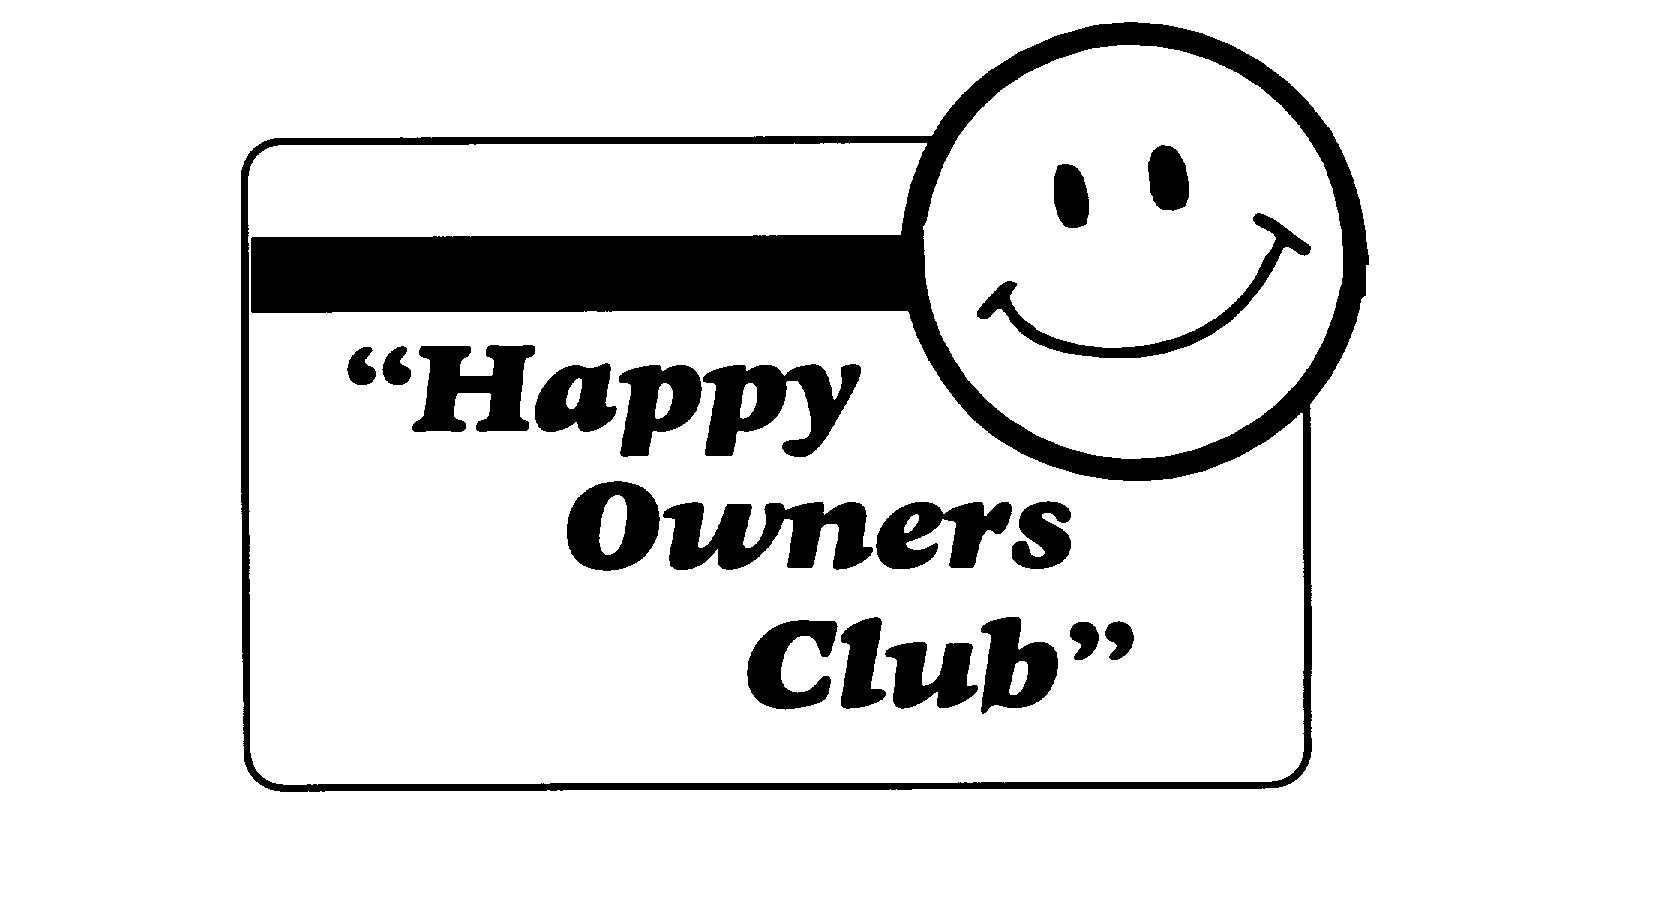  "HAPPY OWNERS CLUB"